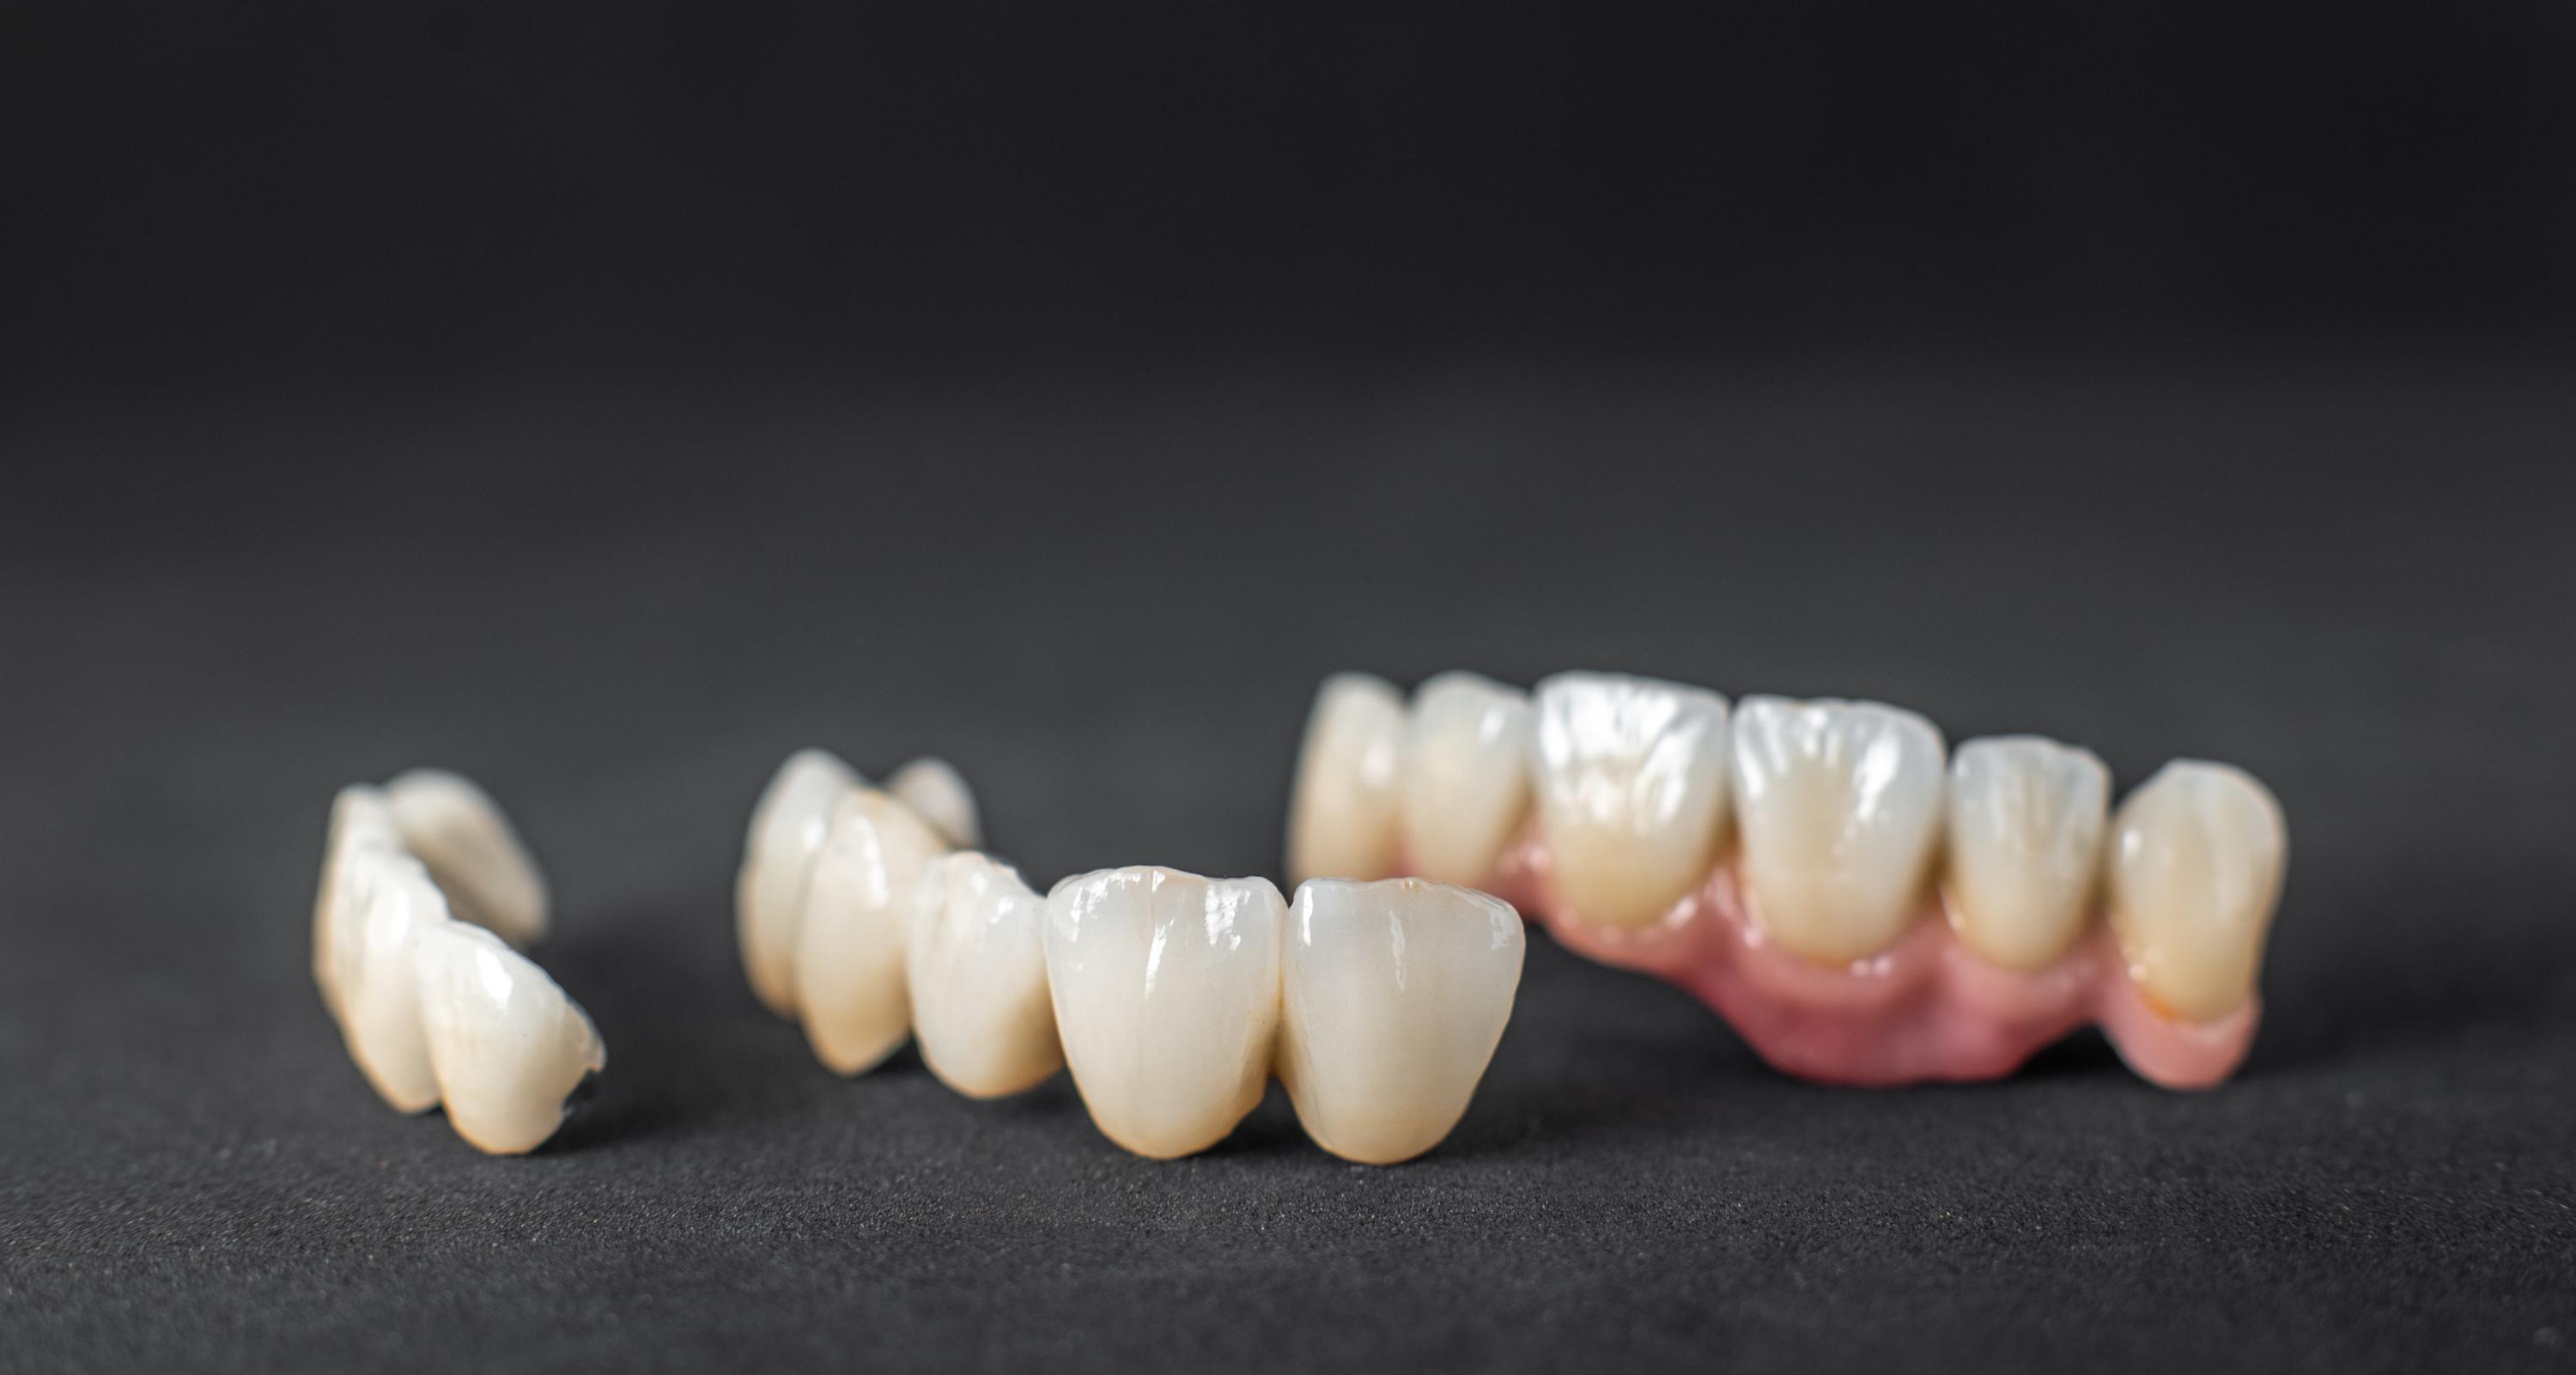 Close-up on dental crowns on the black background. Concept of prosthetics and implantation in dentistry